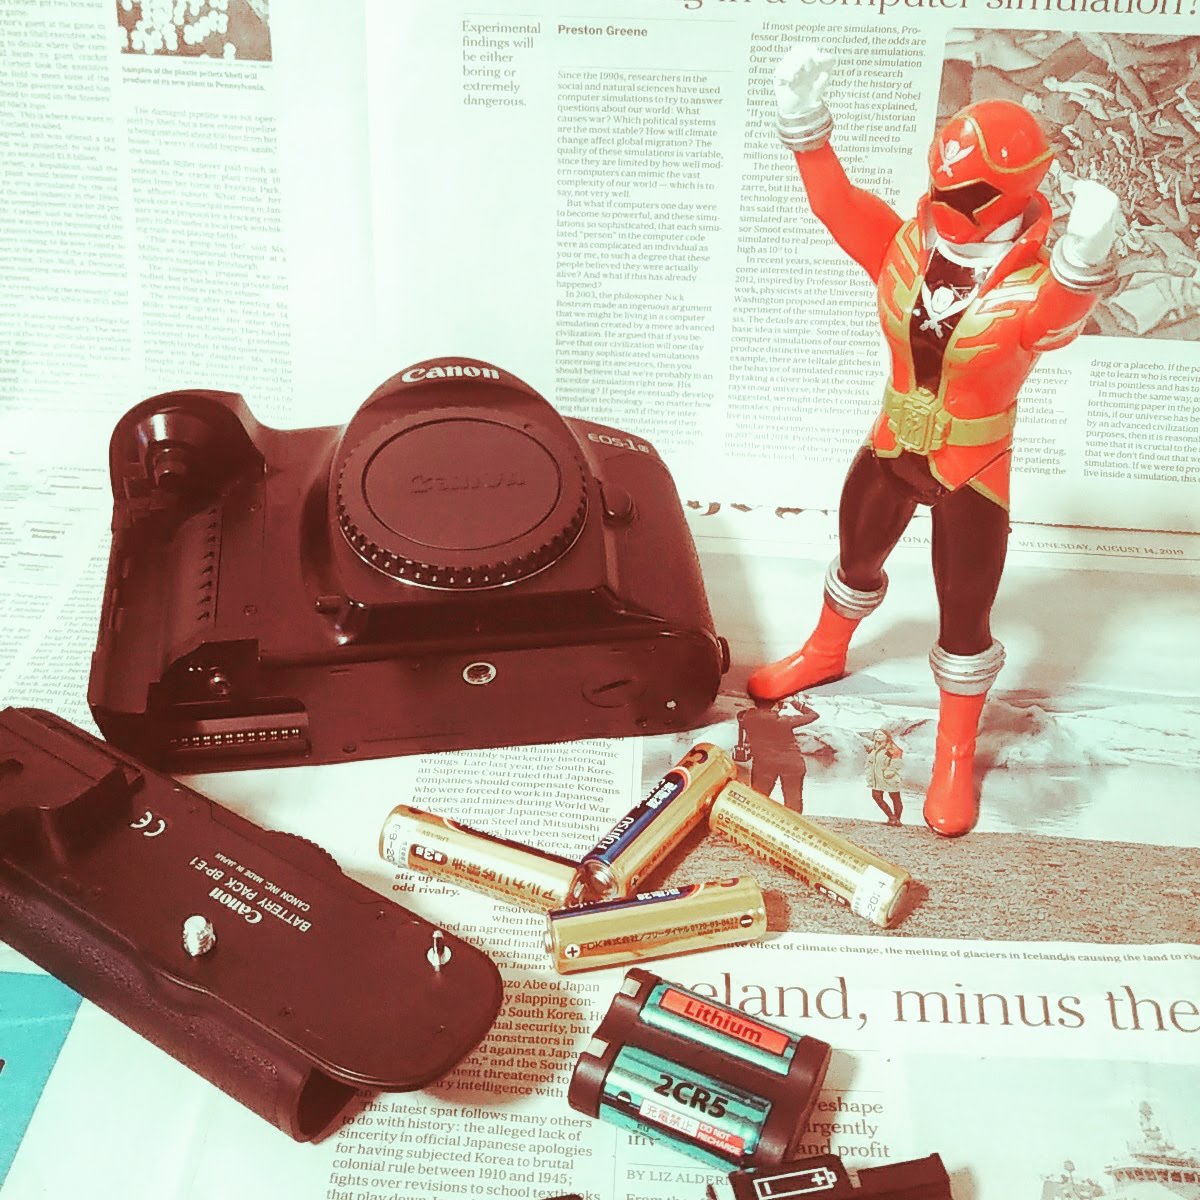 Let’s clean up. (Introduction of “NEAR MINT Canon EOS-1N BP-E1 35mm Film Camera Body Only W/ Body Cap from Japan”)